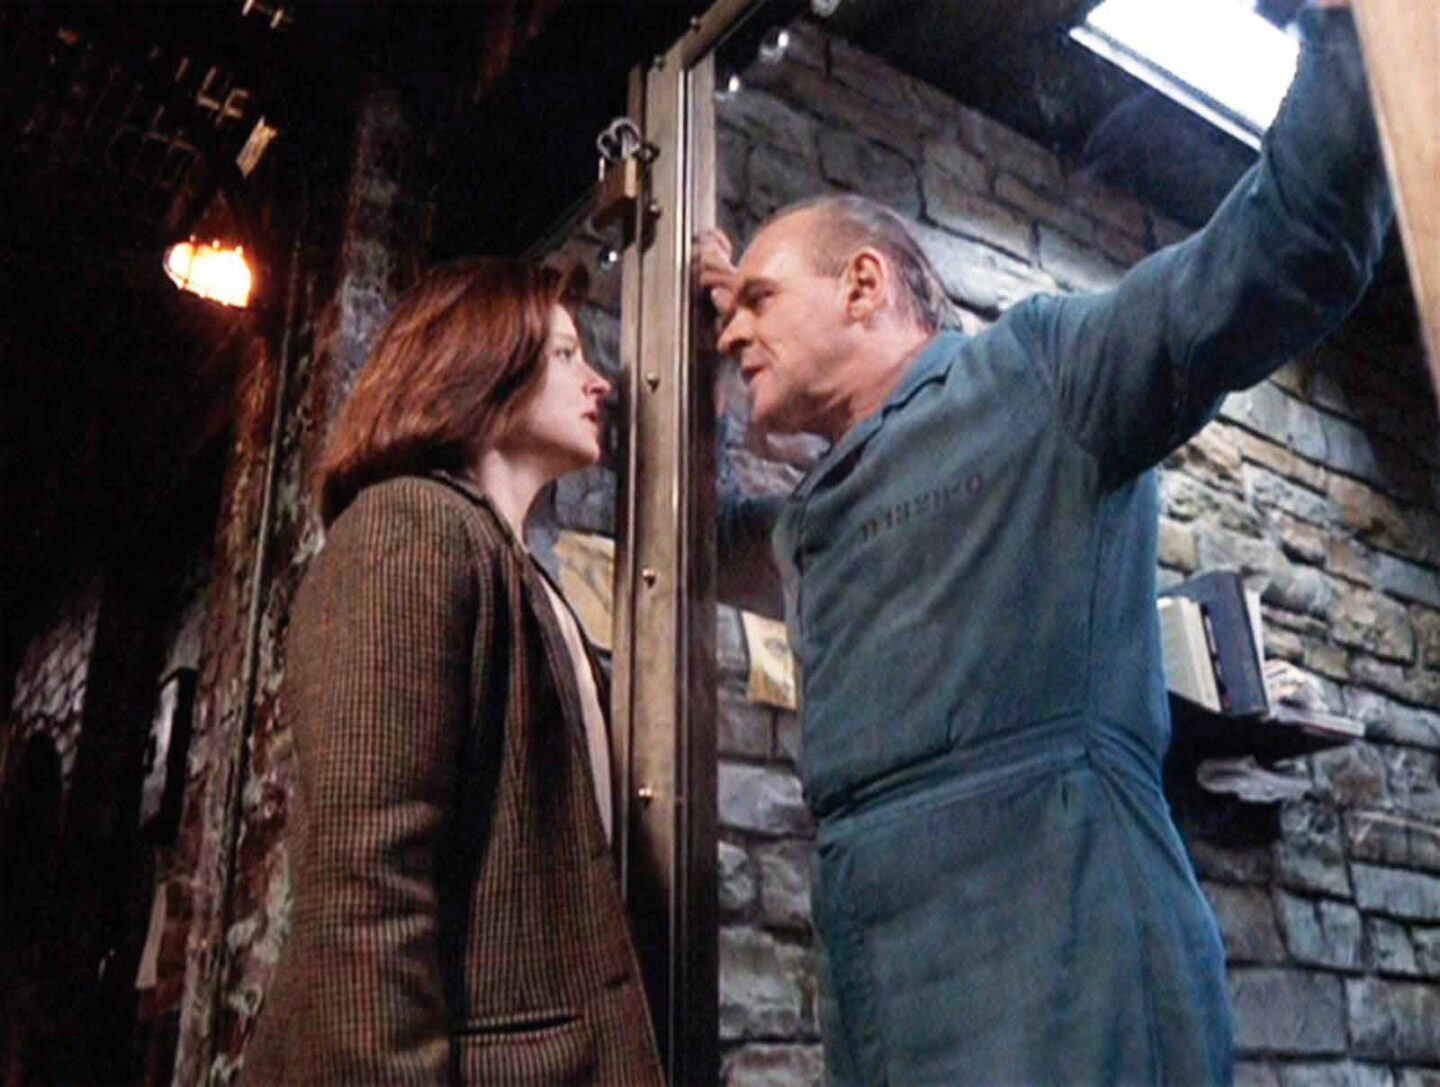 Scene from the film 'Silence of the Lambs'.